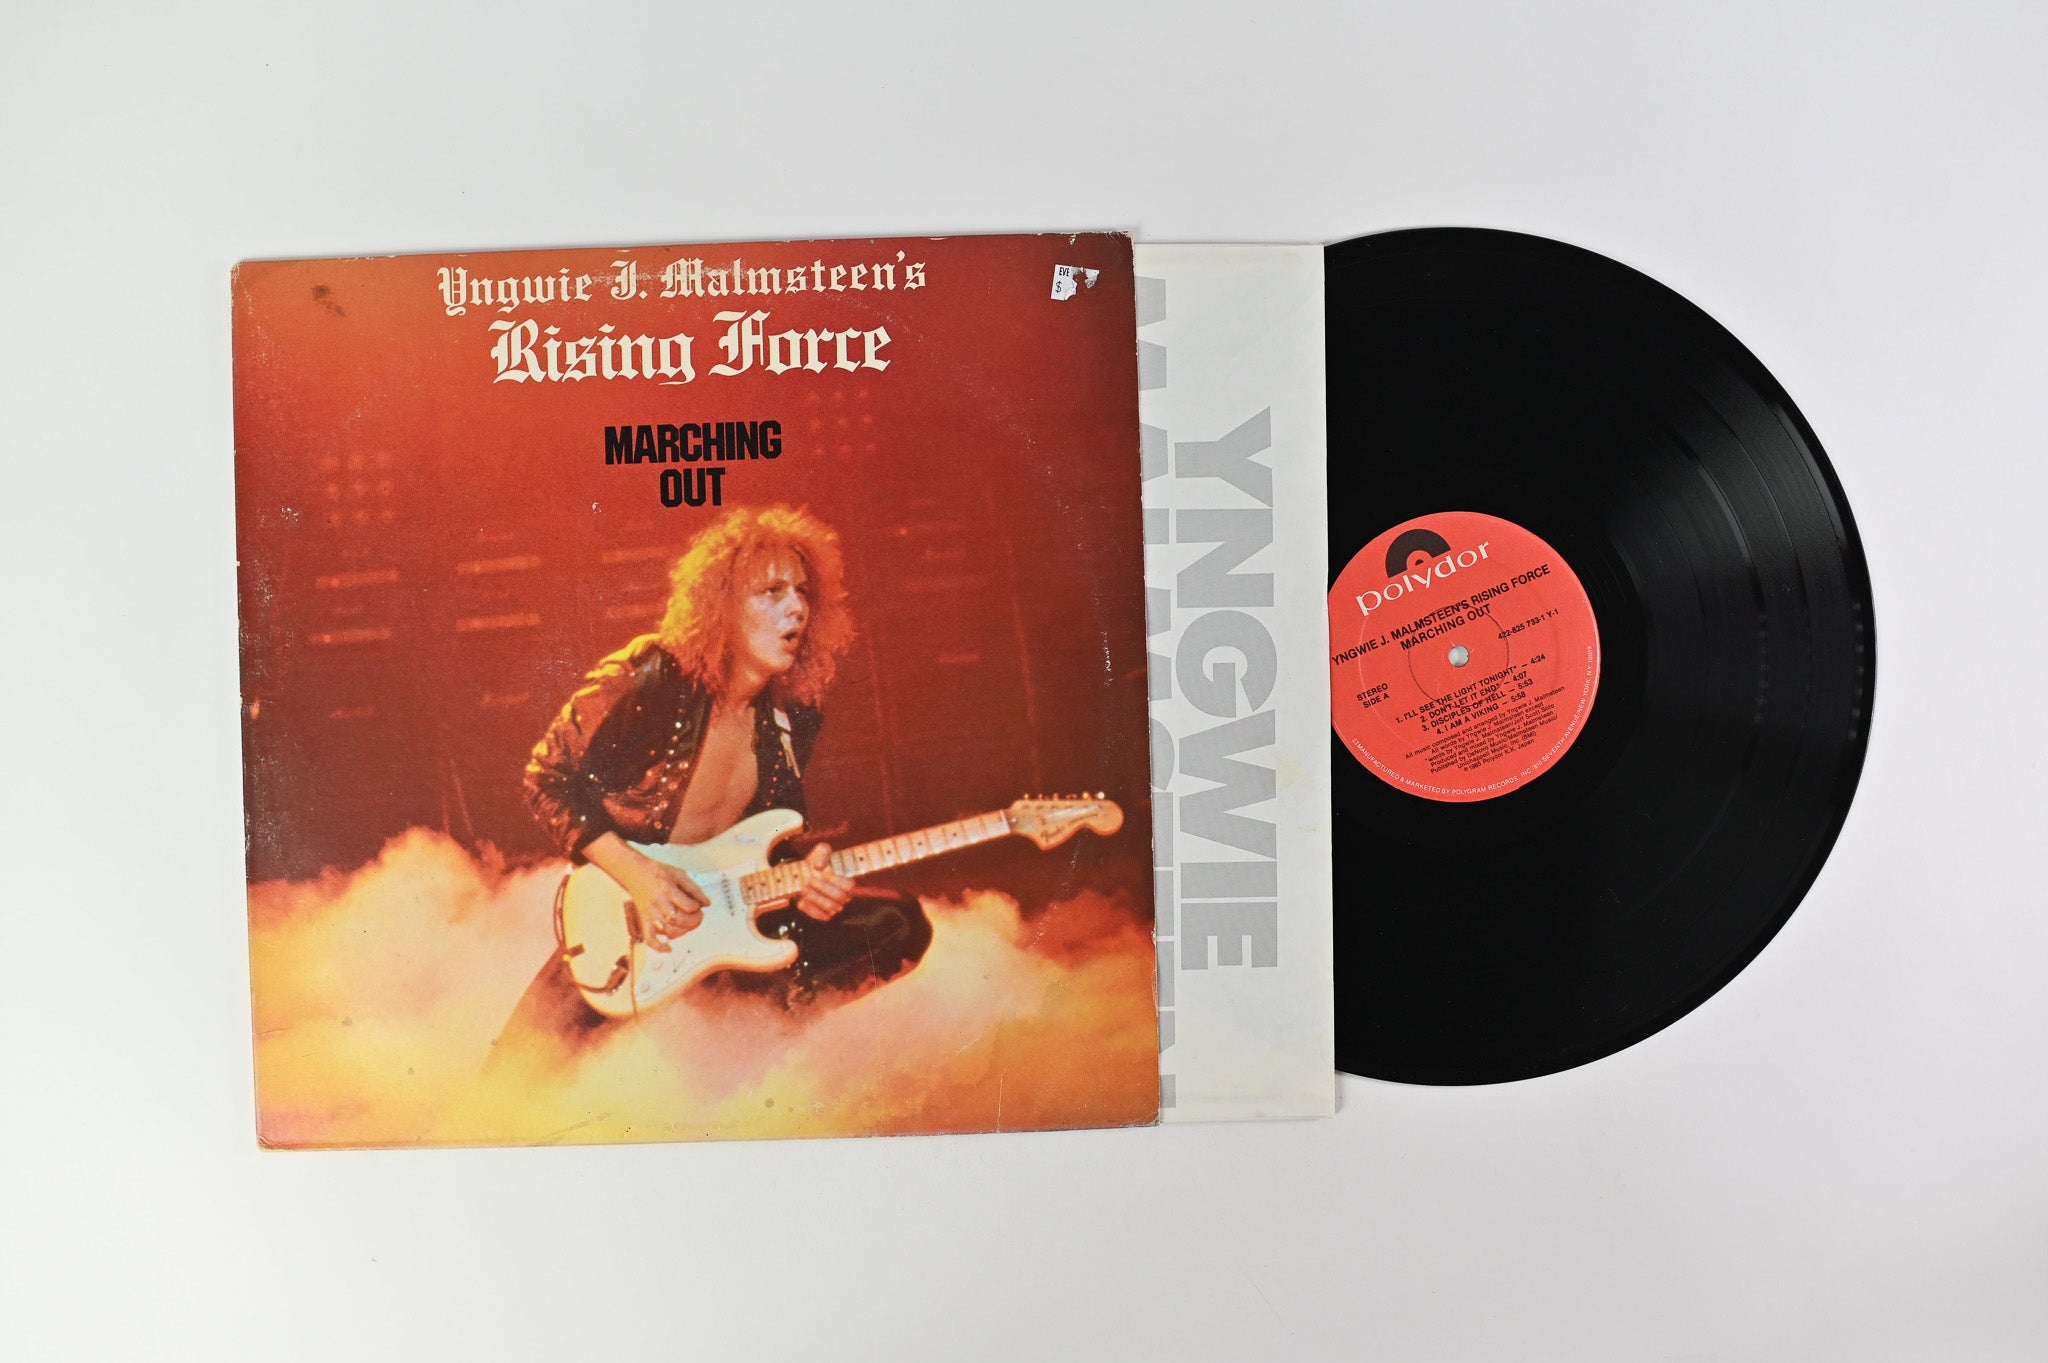 Yngwie J. Malmsteen's Rising Force - Marching Out on Polydor